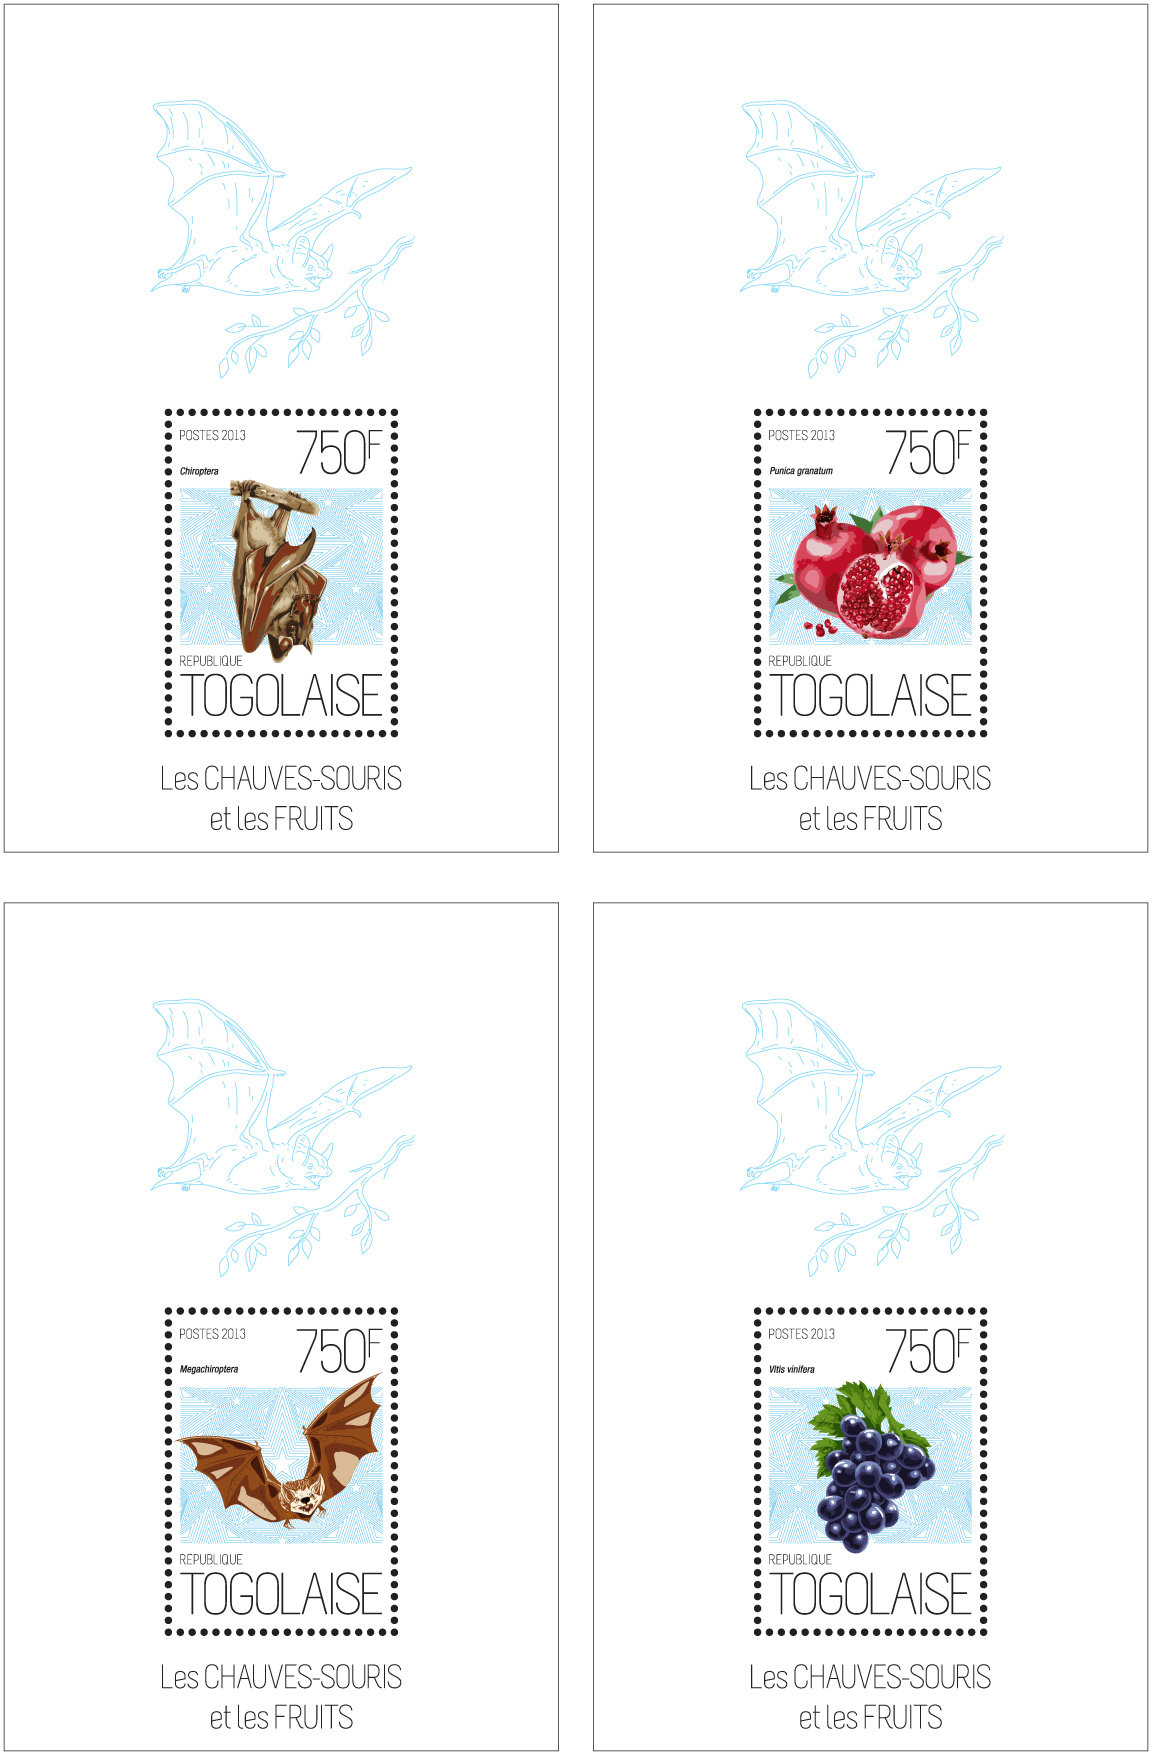 Bats and fruits - Issue of Togo postage stamps